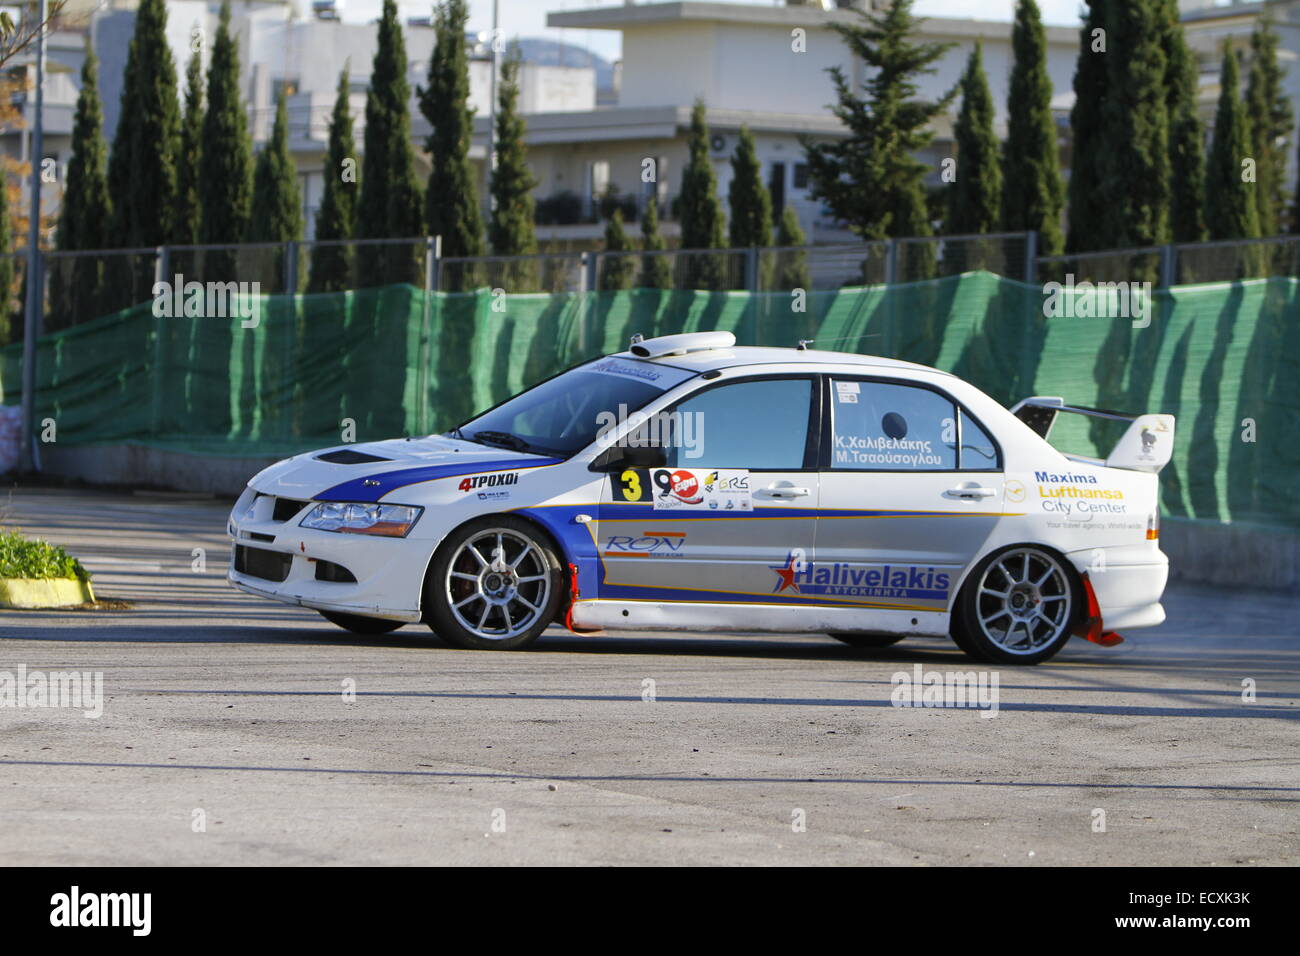 Athens, Greece. 21th Dec 2014. Greek rally driver Konstantinos Chalivelakis and his co-driver Marios Tsaousoglou race in a Mitsubishi Evo 8 in the Golden Rally Show 2014. The first Golden Rally Show was held in the Athens Olympic Sports Complex. The race is a continuation of the 'Nino Memorial race' that was held annually in remembrance of Greek driver Nino Samaropoulou. Credit:  Michael Debets/Alamy Live News Stock Photo